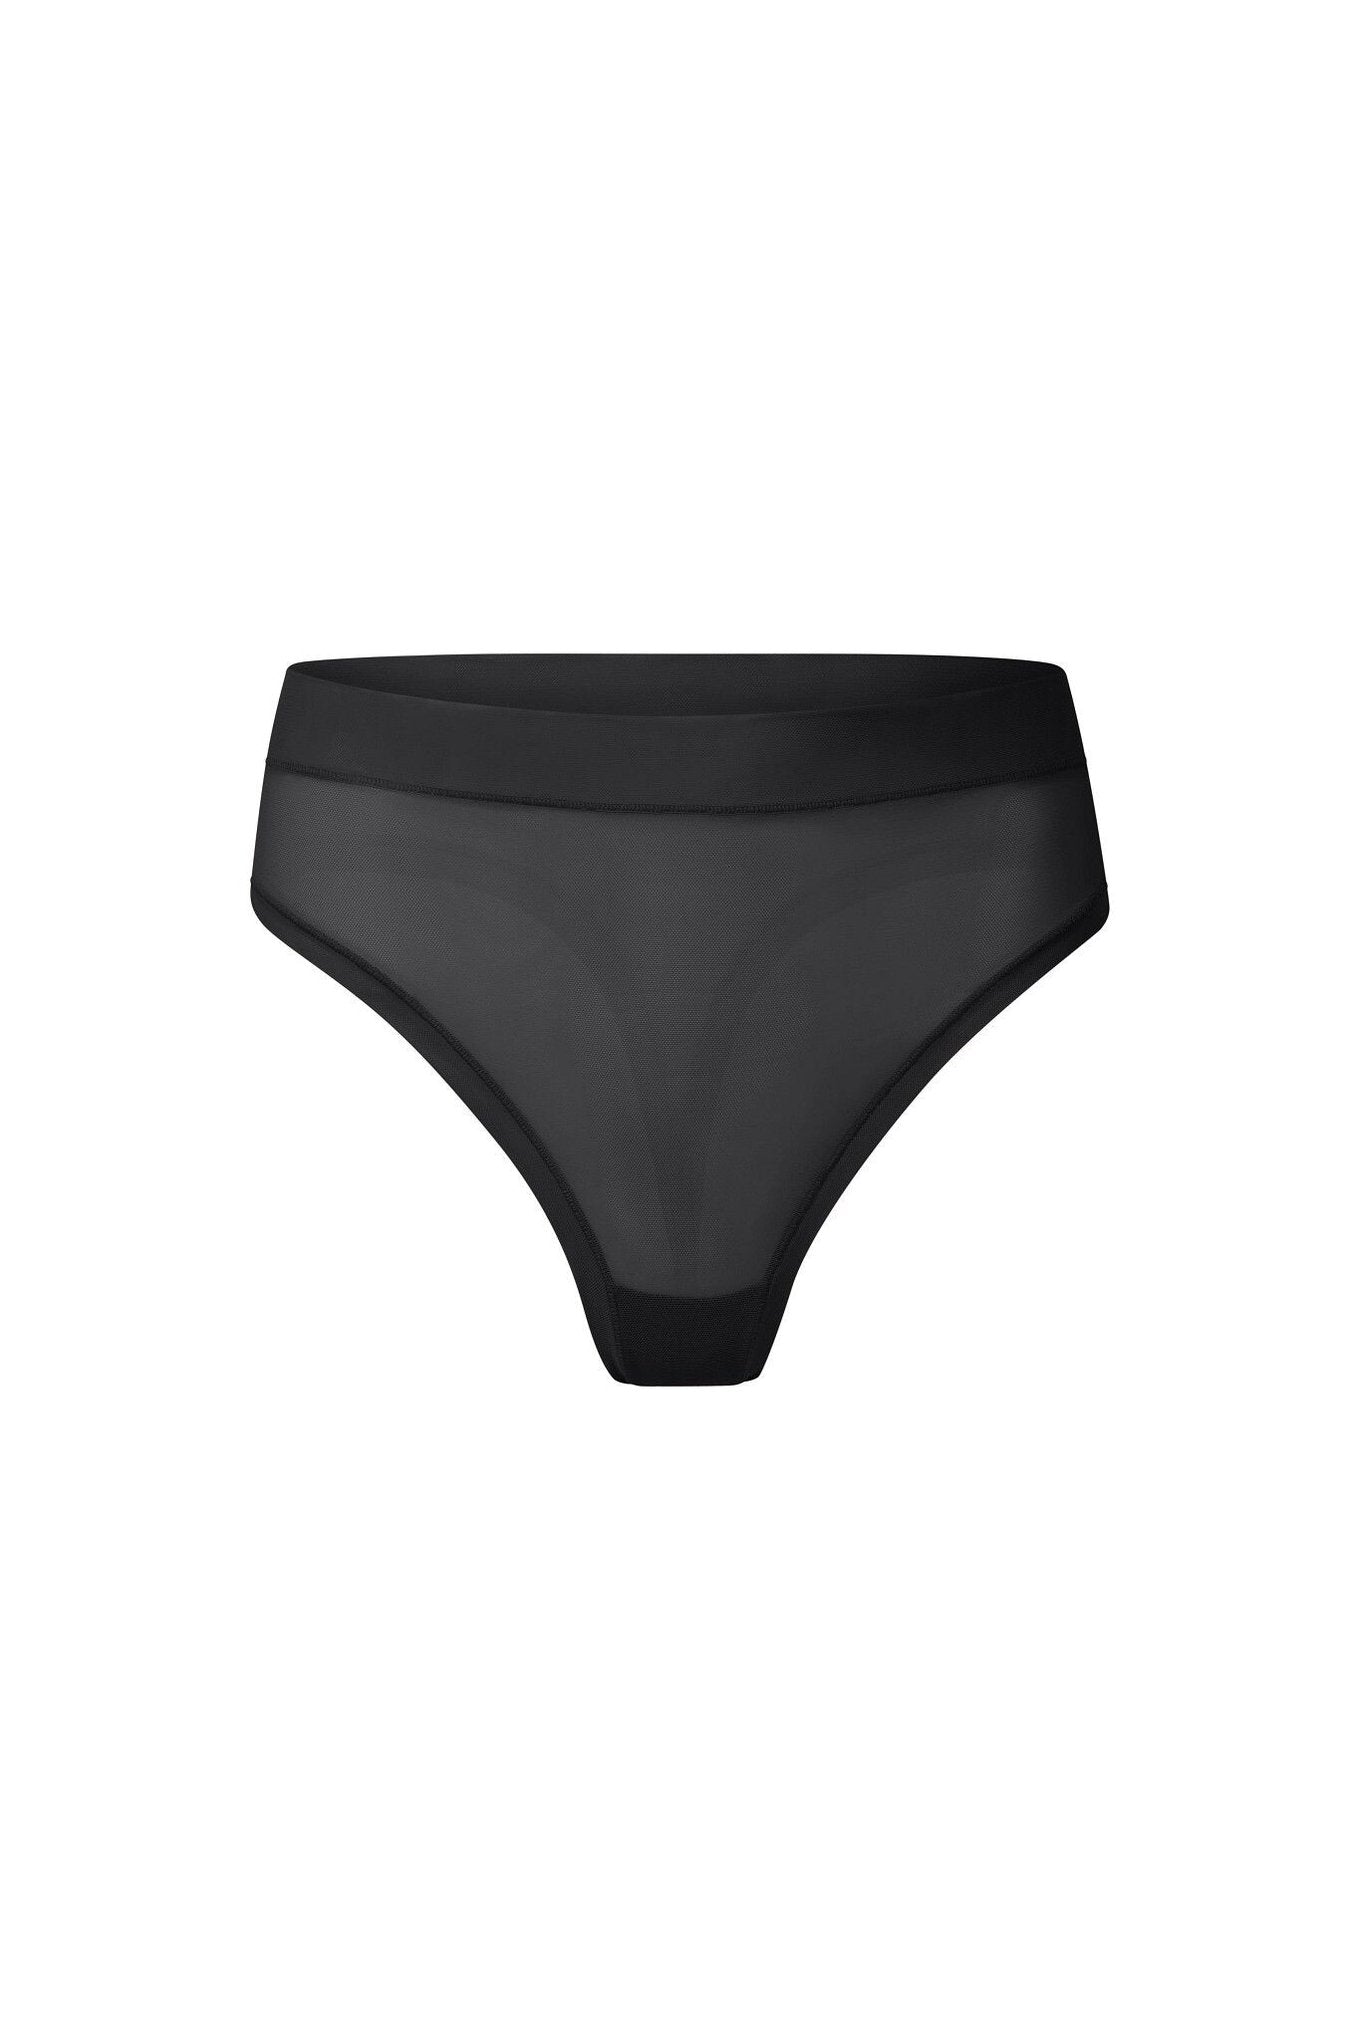 nueskin Carey Mesh Mid-Rise Thong in color Jet Black and shape thong